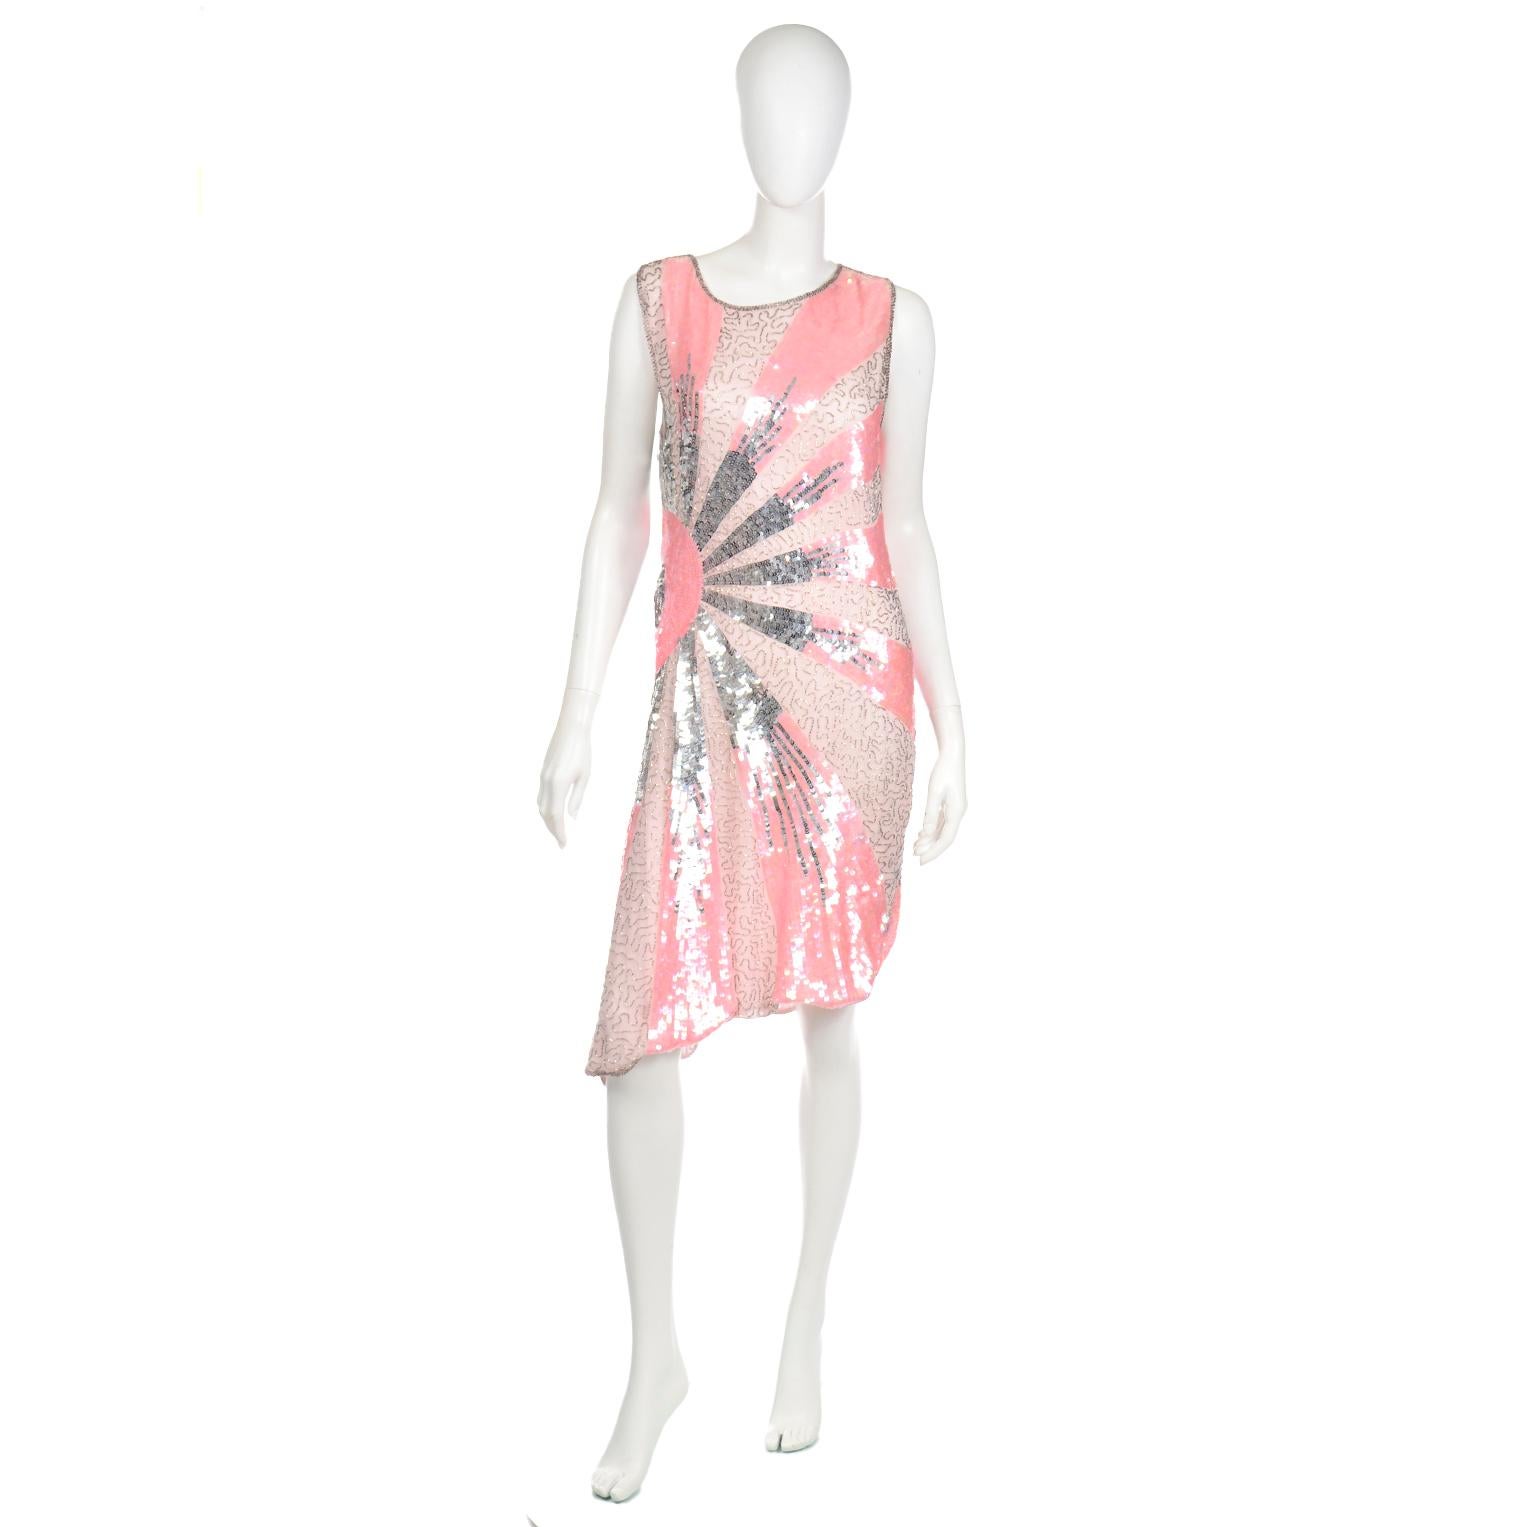 This is a stunning vintage pink flapper style evening dress with silver, pink and sequins and silver bugle beads. We love that the pattern of the beading and sequins creates a sunburst effect that radiates from the right side of the waist! The dress